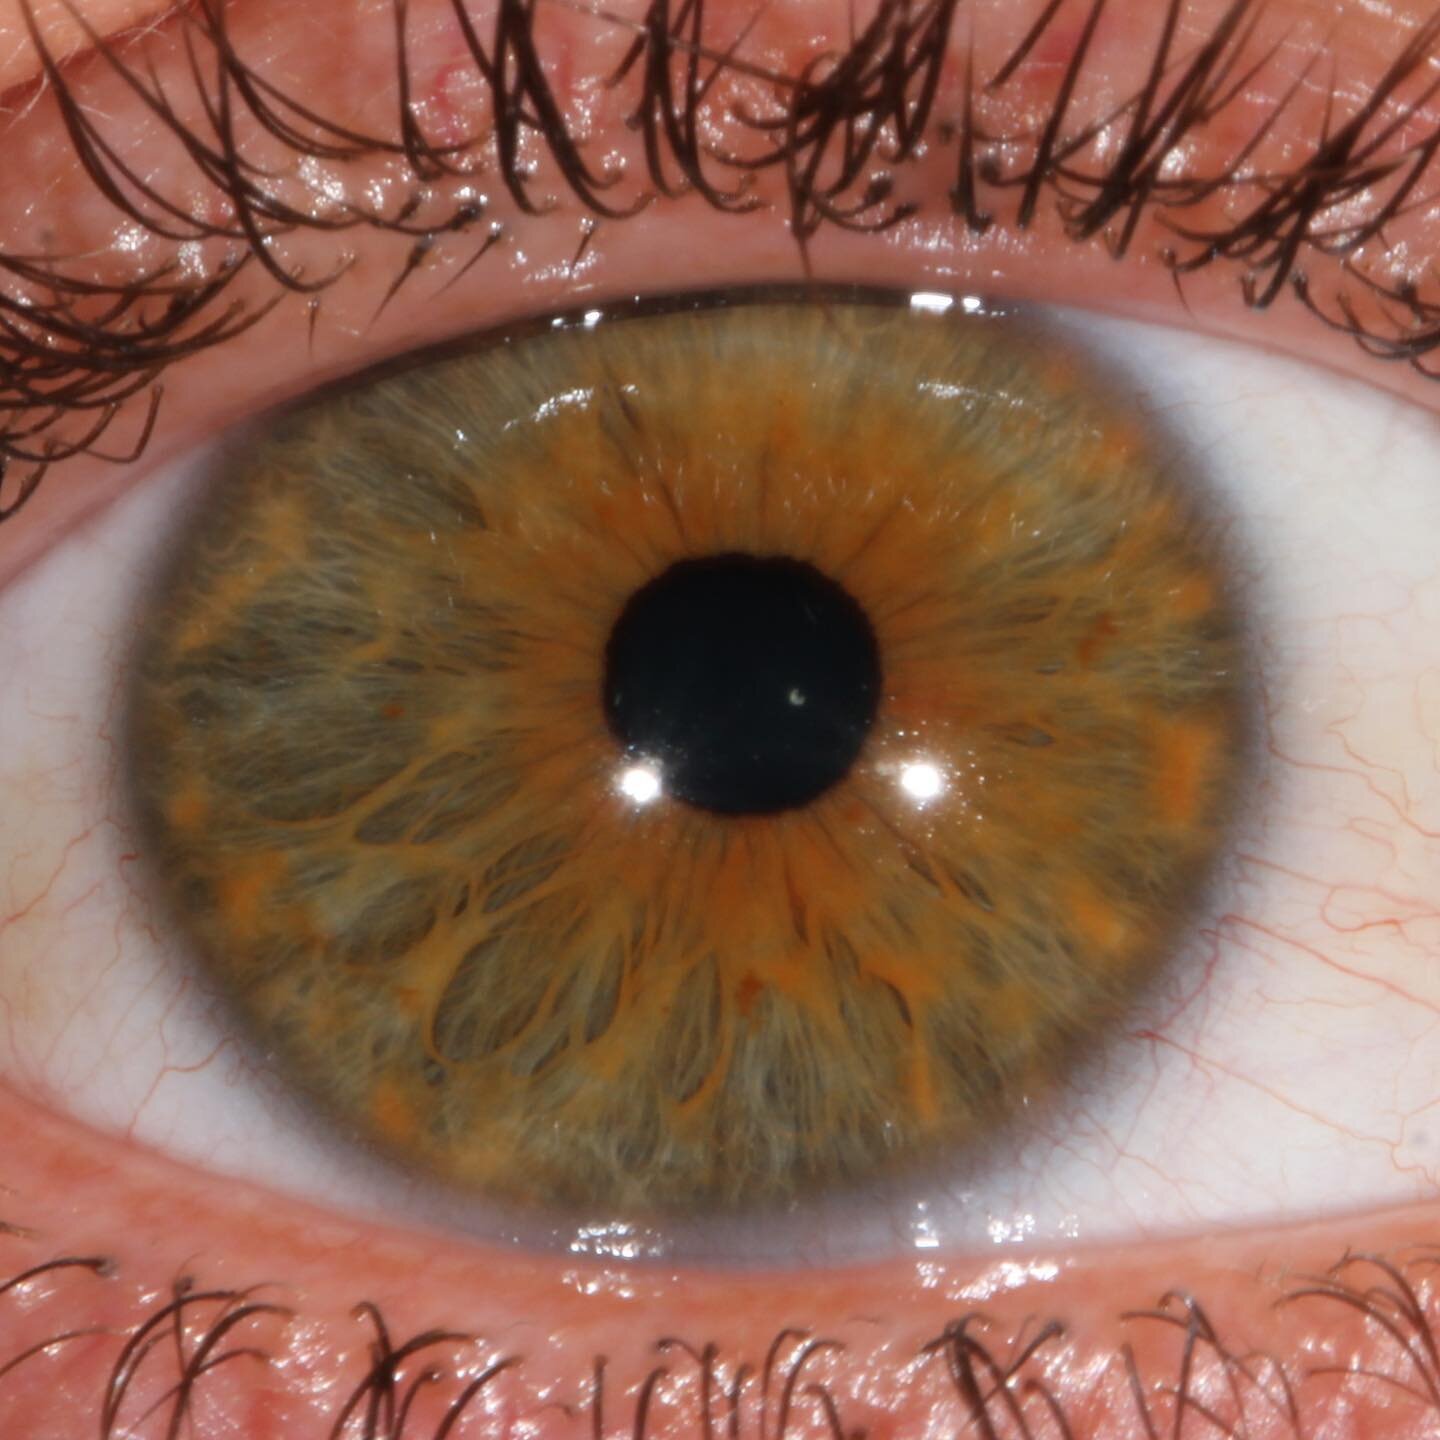 Most incredible irises this afternoon in clinic &mdash; trauma to the left iris (image 2) has caused the pupil to remain dilated.